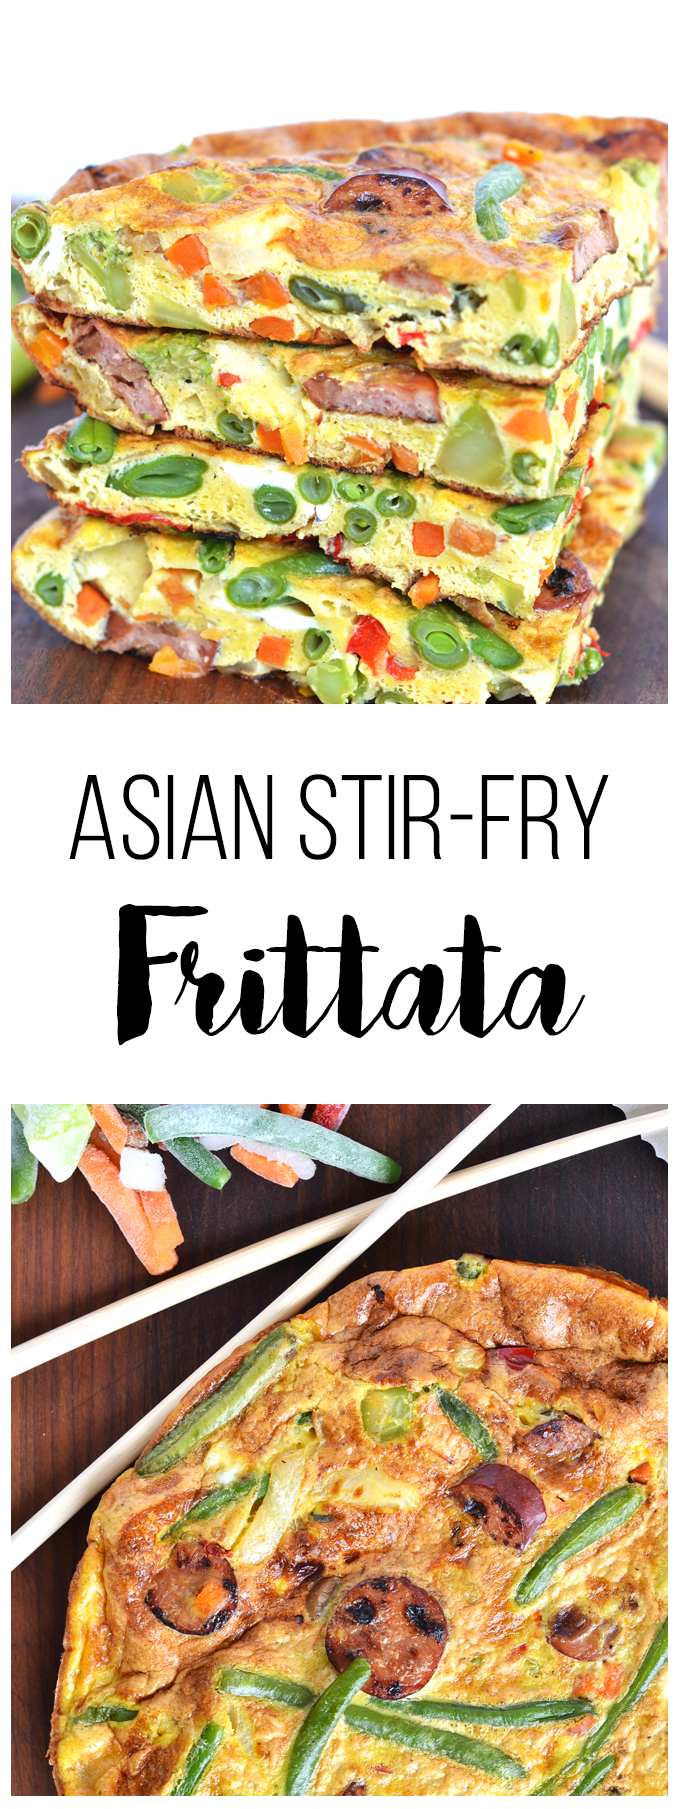 This Asian Stir-Fry Frittata is a great way to mix up your eggs in the morning!! A whole 30 approved and paleo breakfast that you will crave! Easy to make with frozen veggies!